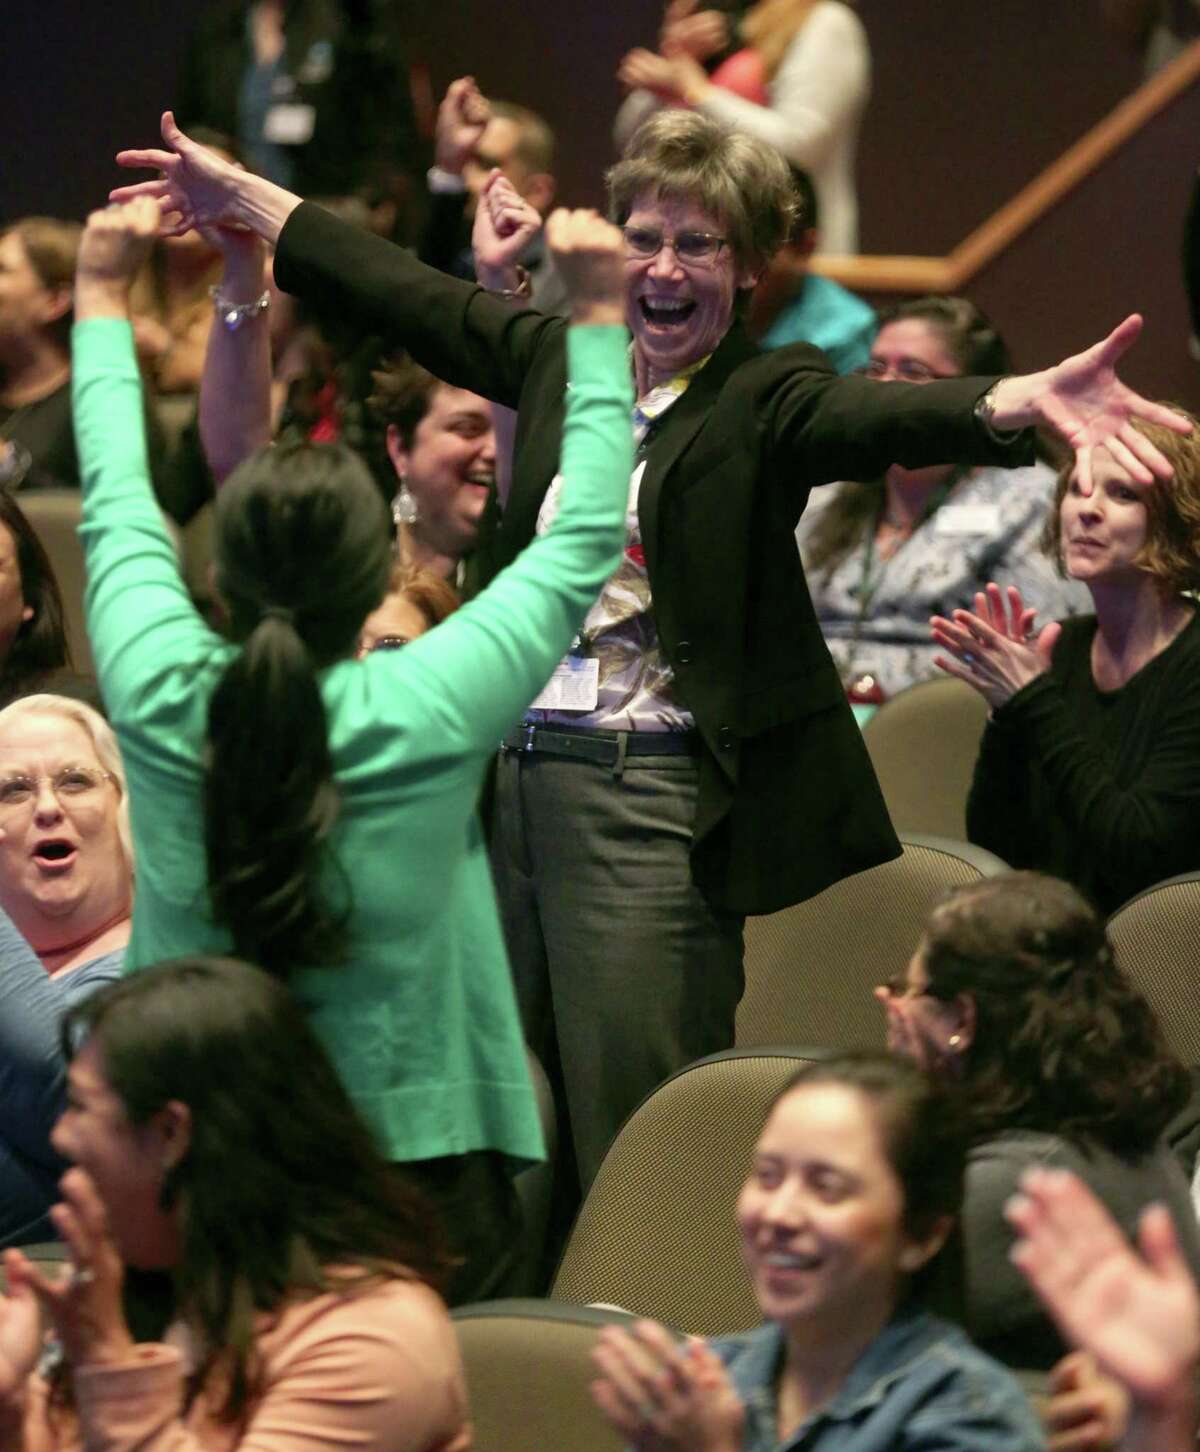 Elizabeth Tanner, right, Palo Alto College vice president for academic success, celebrates Tuesday, April 2, 2019 on the PAC campus as winners are announced for the Aspen Prize for Community College Excellence, the top national award for community colleges. Palo Alto received a Rising Star award from the Institute, which comes with a $100,000 prize.